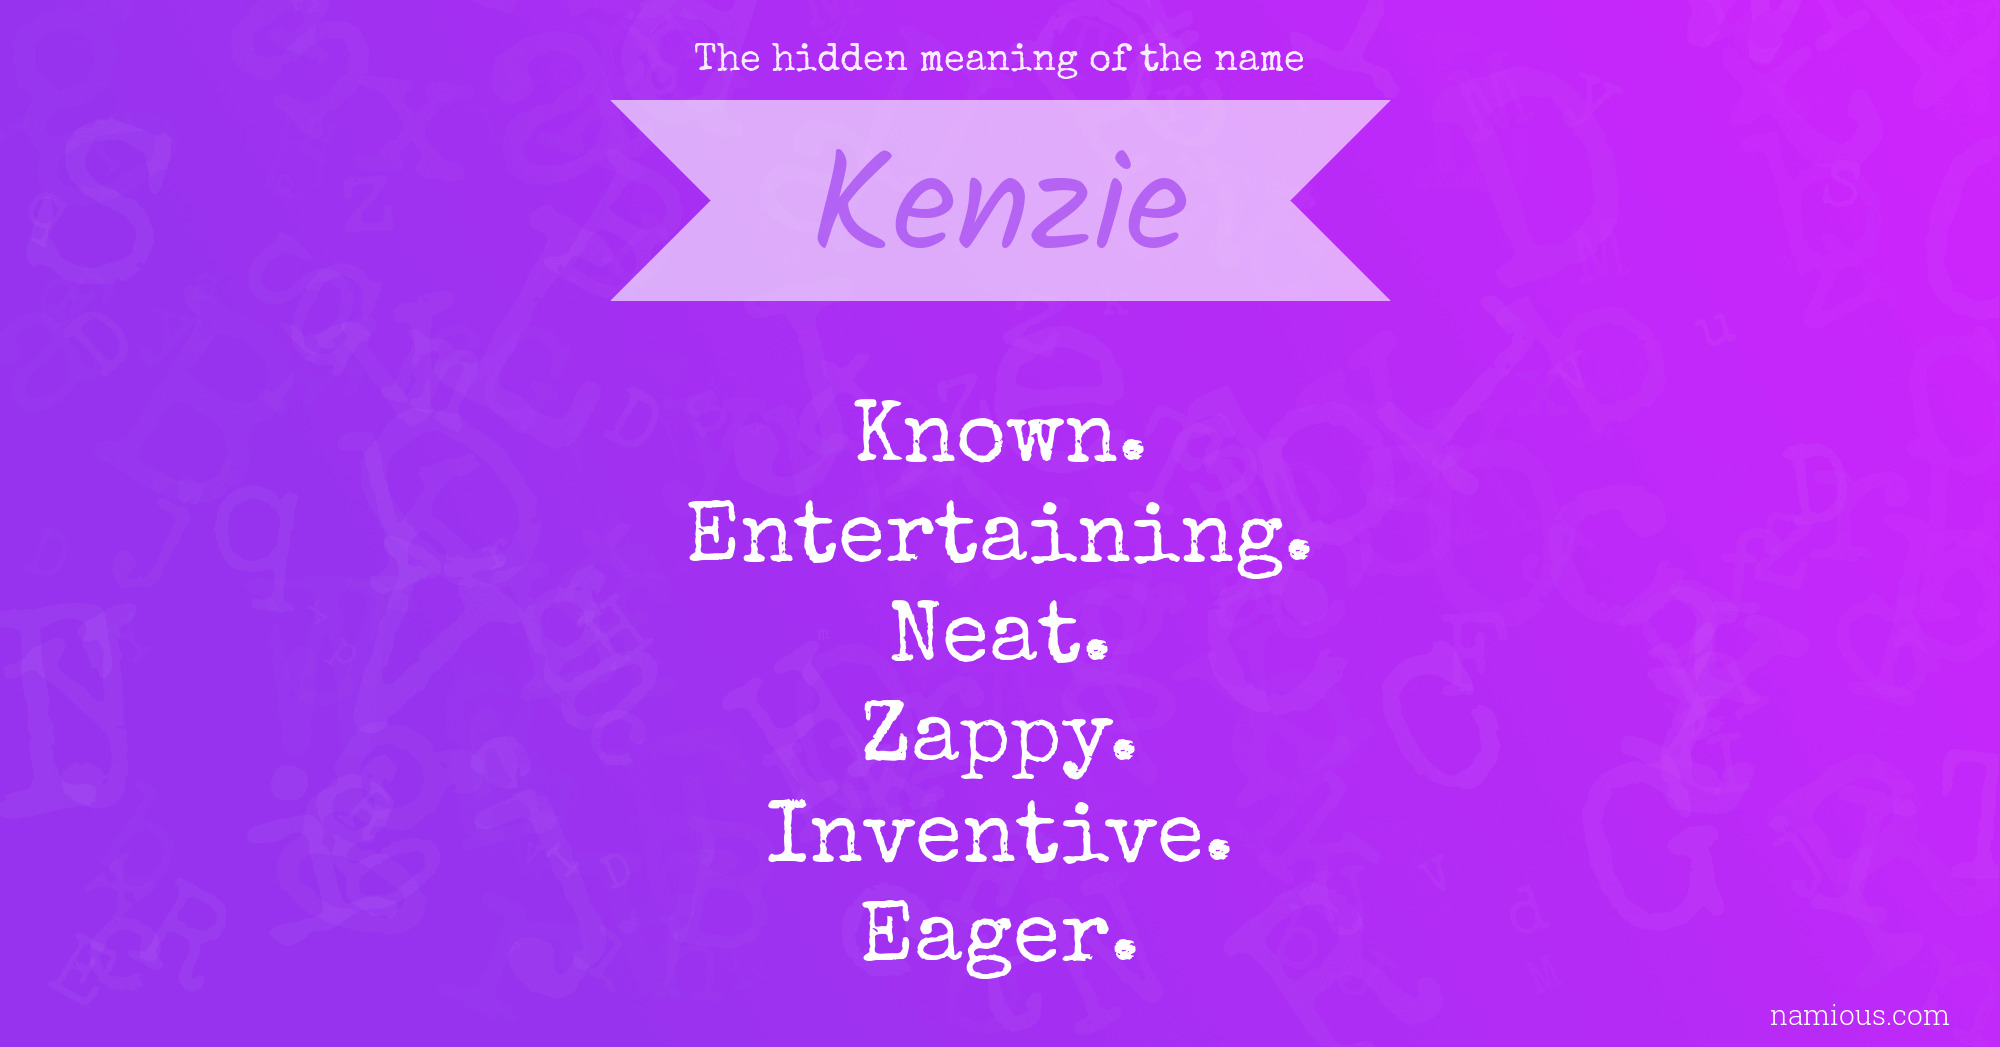 The hidden meaning of the name Kenzie